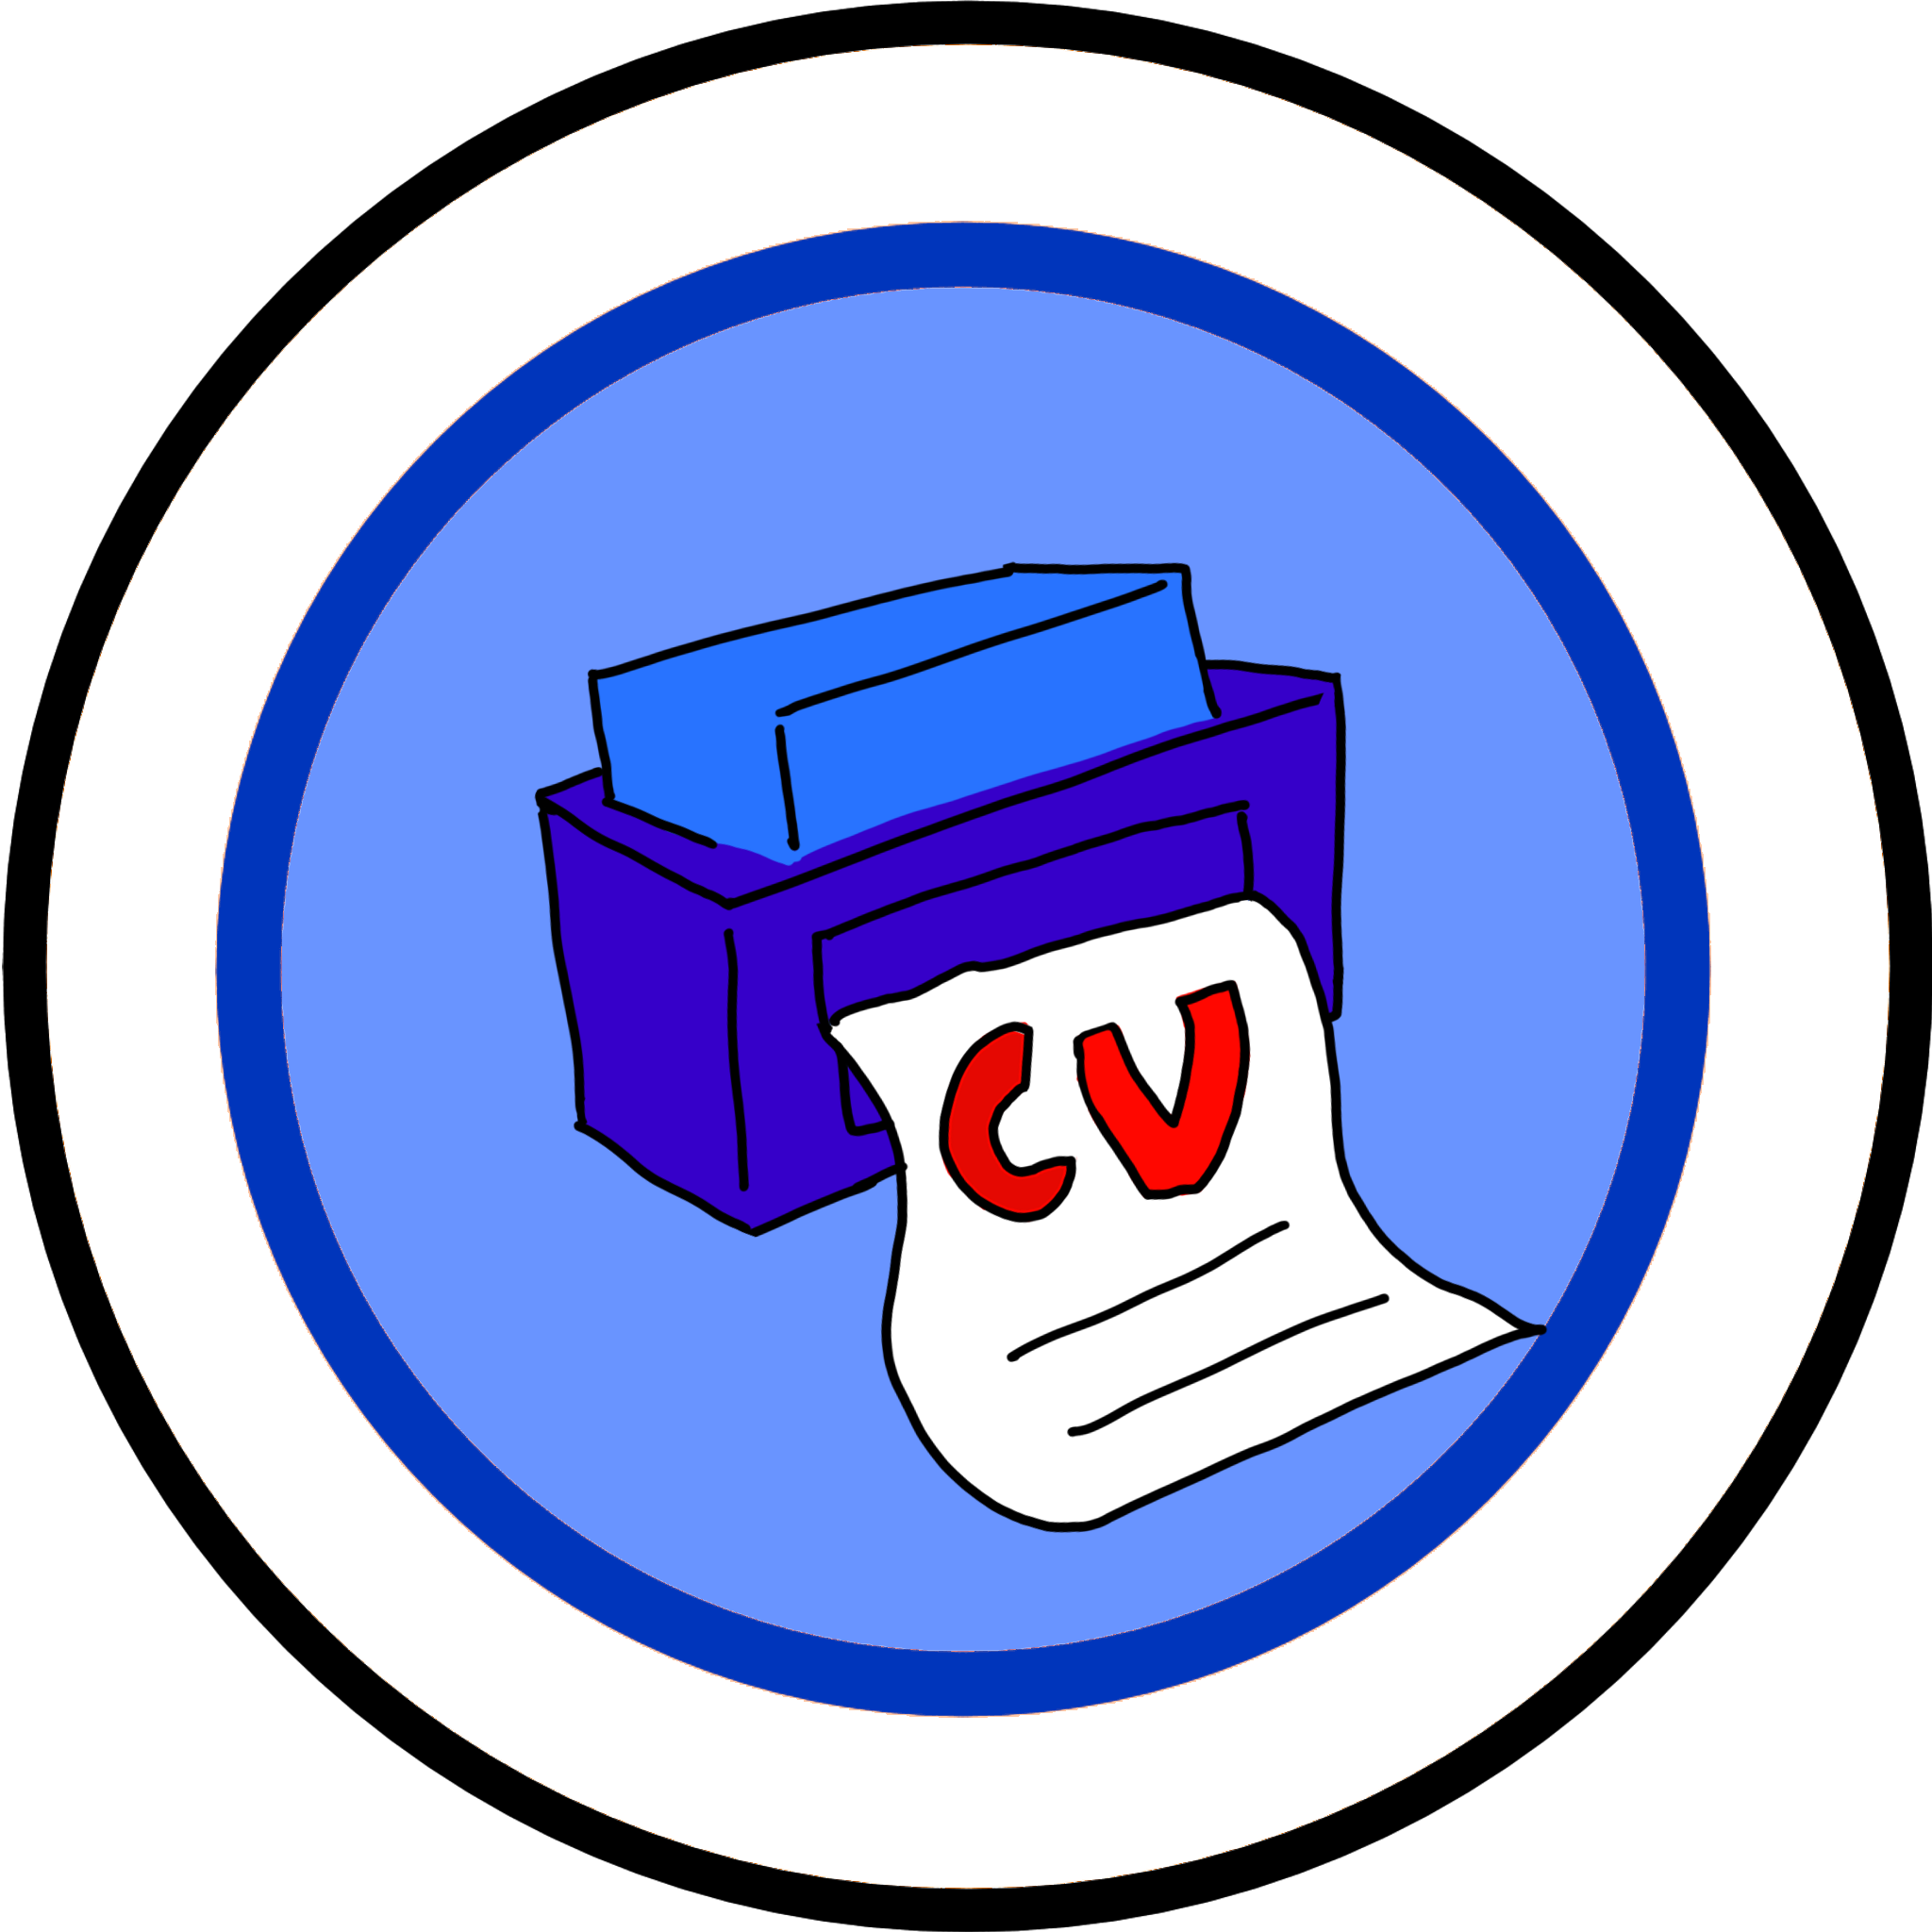 A small logo representing CV-generator - consists of a printer printing out a piece of paper with CV written on it.